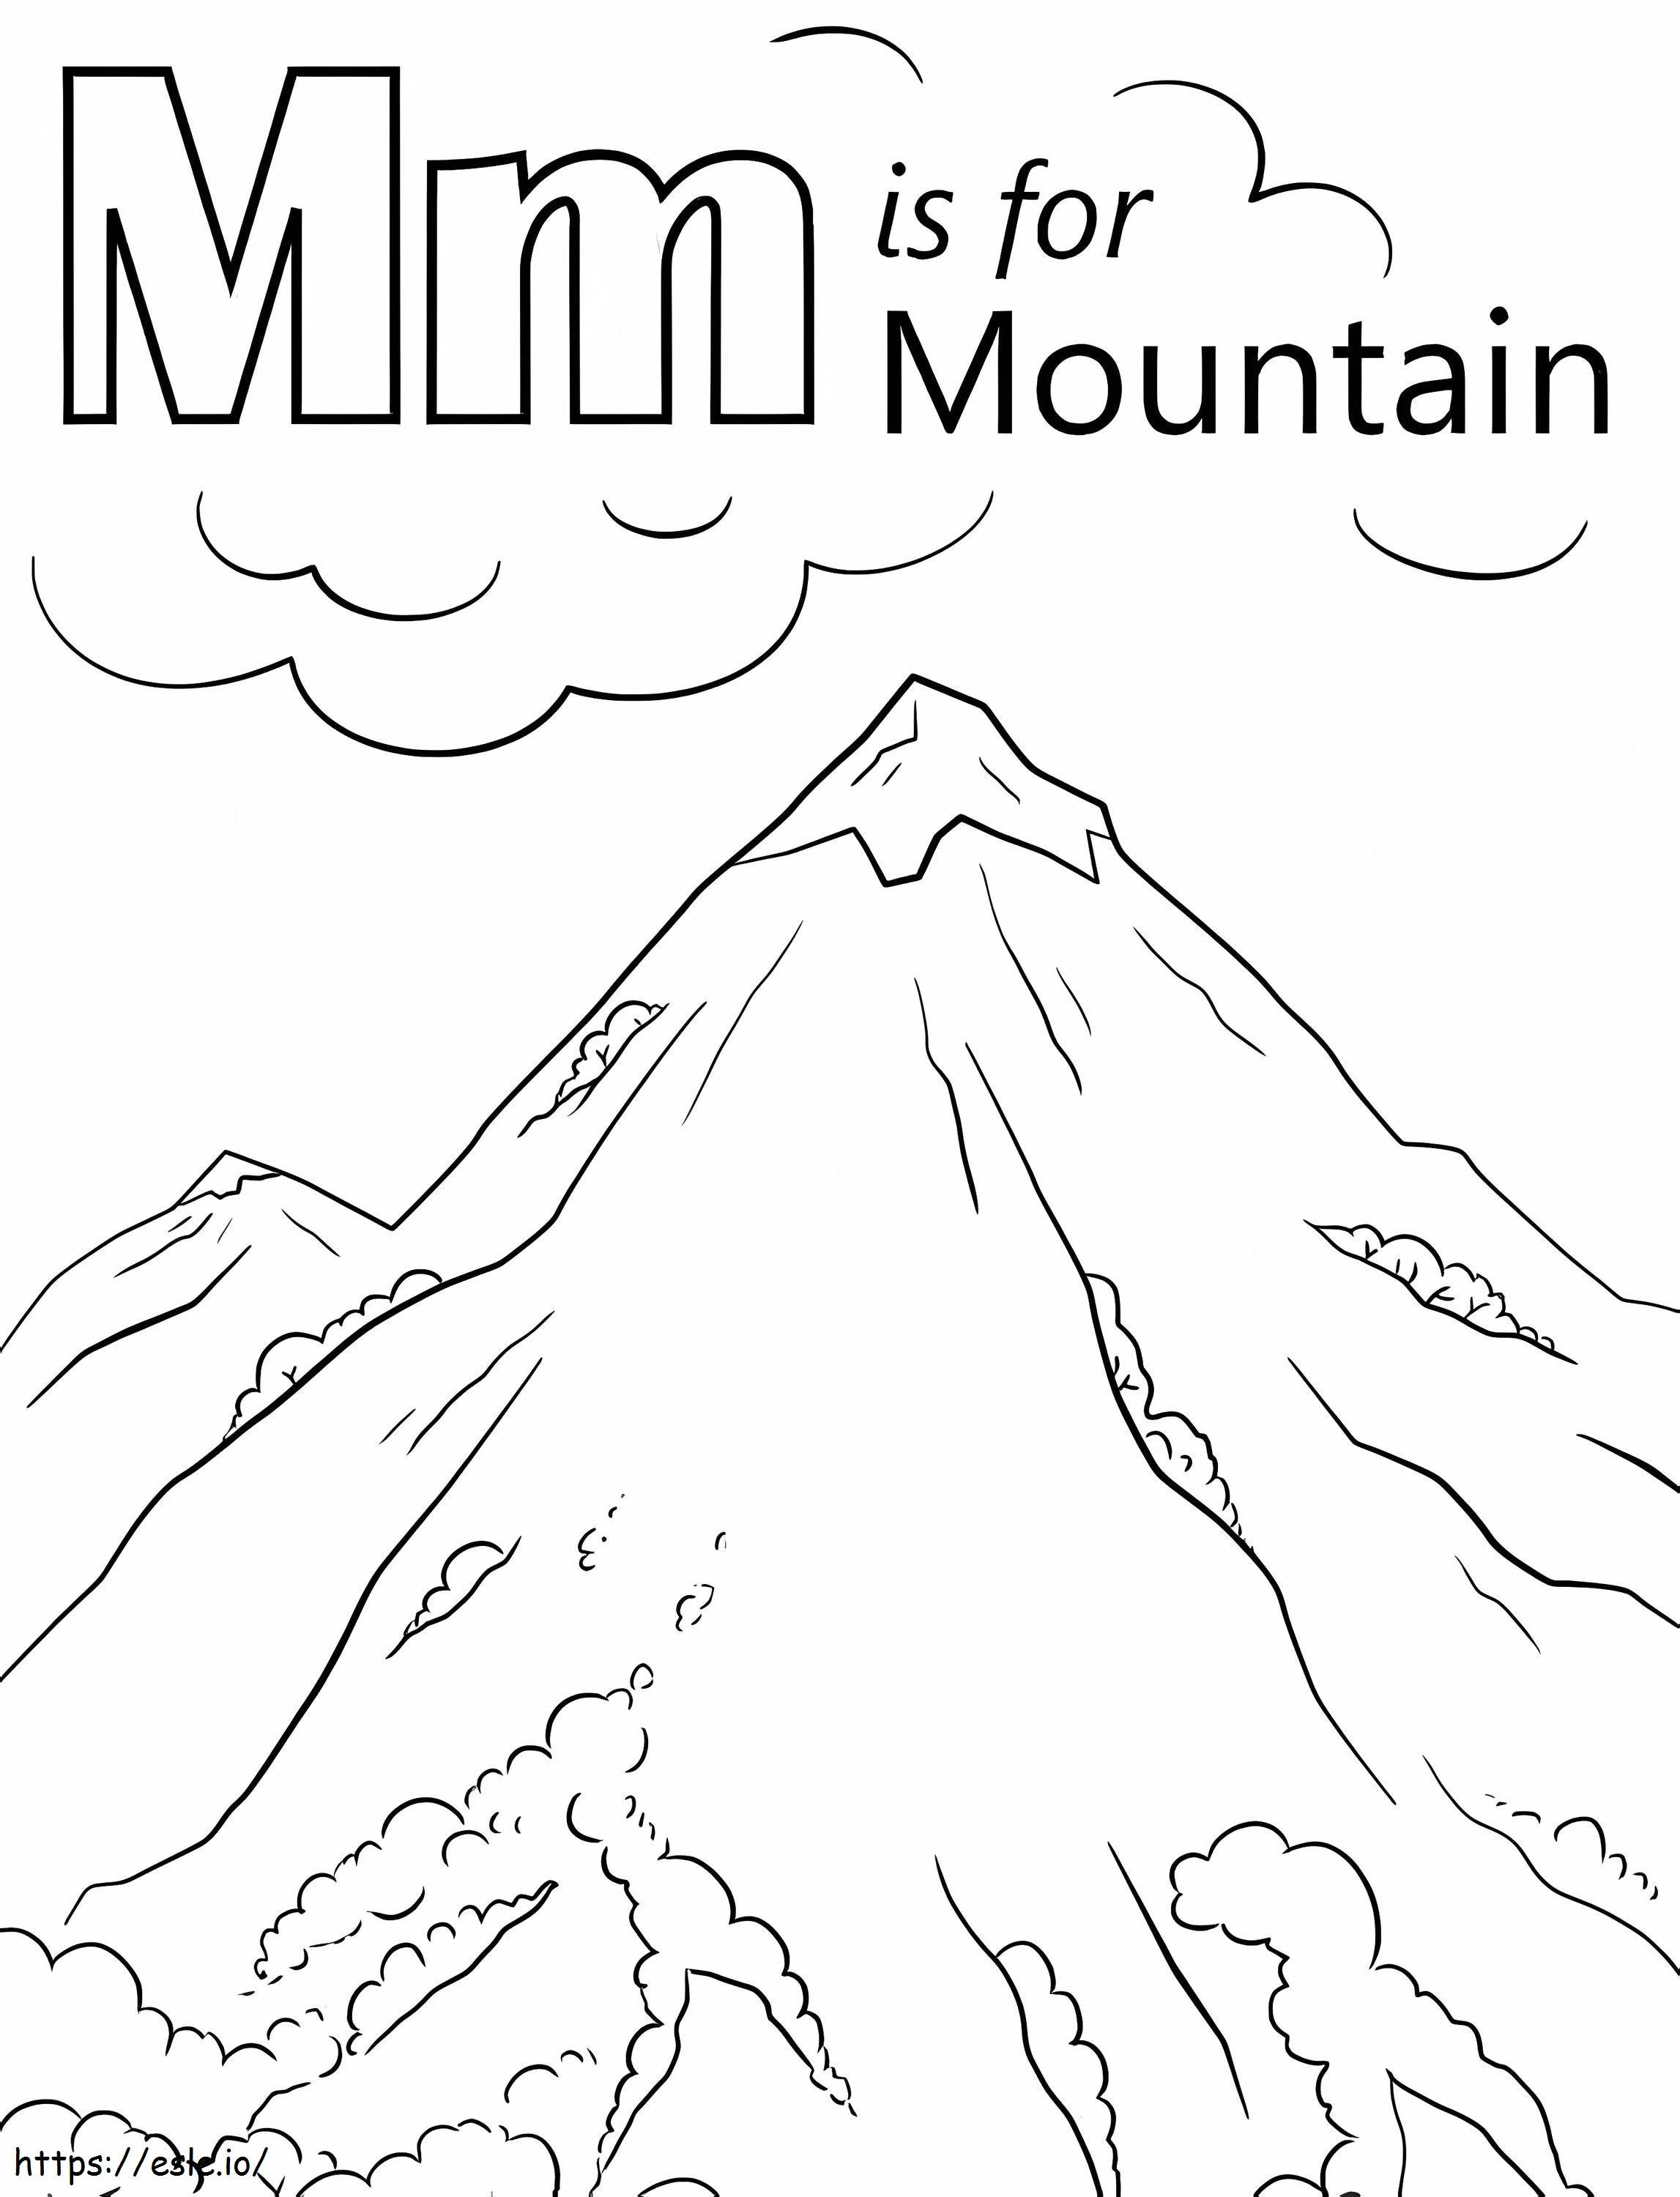 Mountain Letter M coloring page